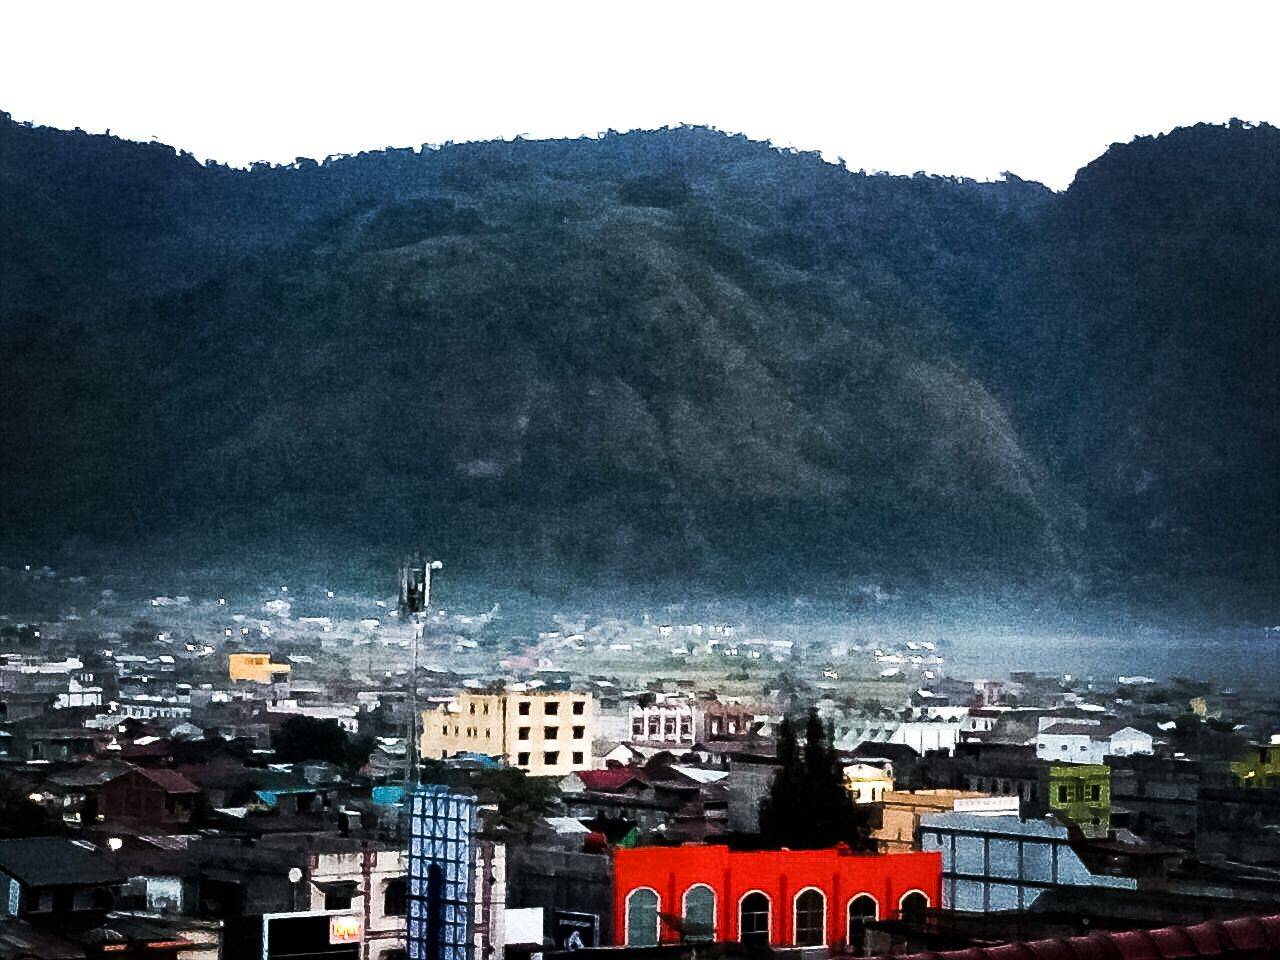 The view of Takengon Town